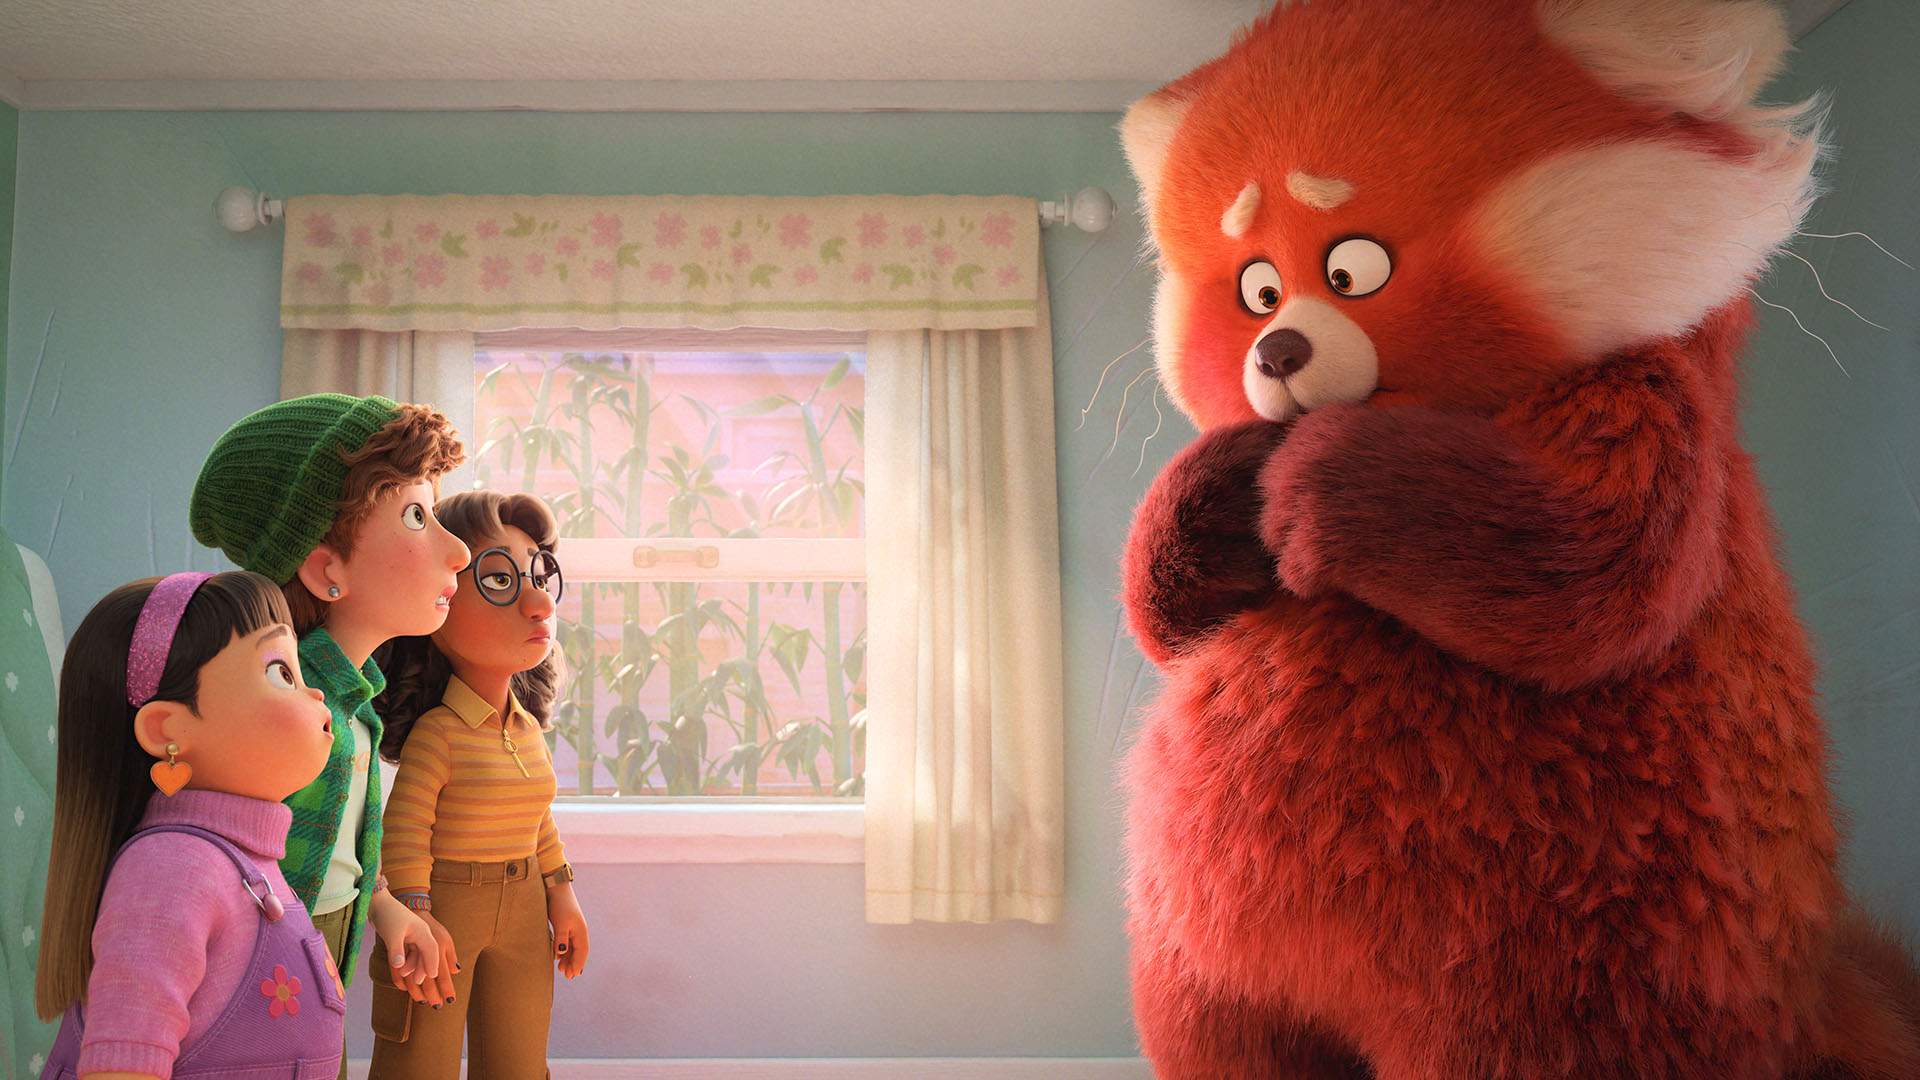 Disney Is Sending Pixar's Next Adorable Movie 'Turning Red' Straight to Your Streaming Queue